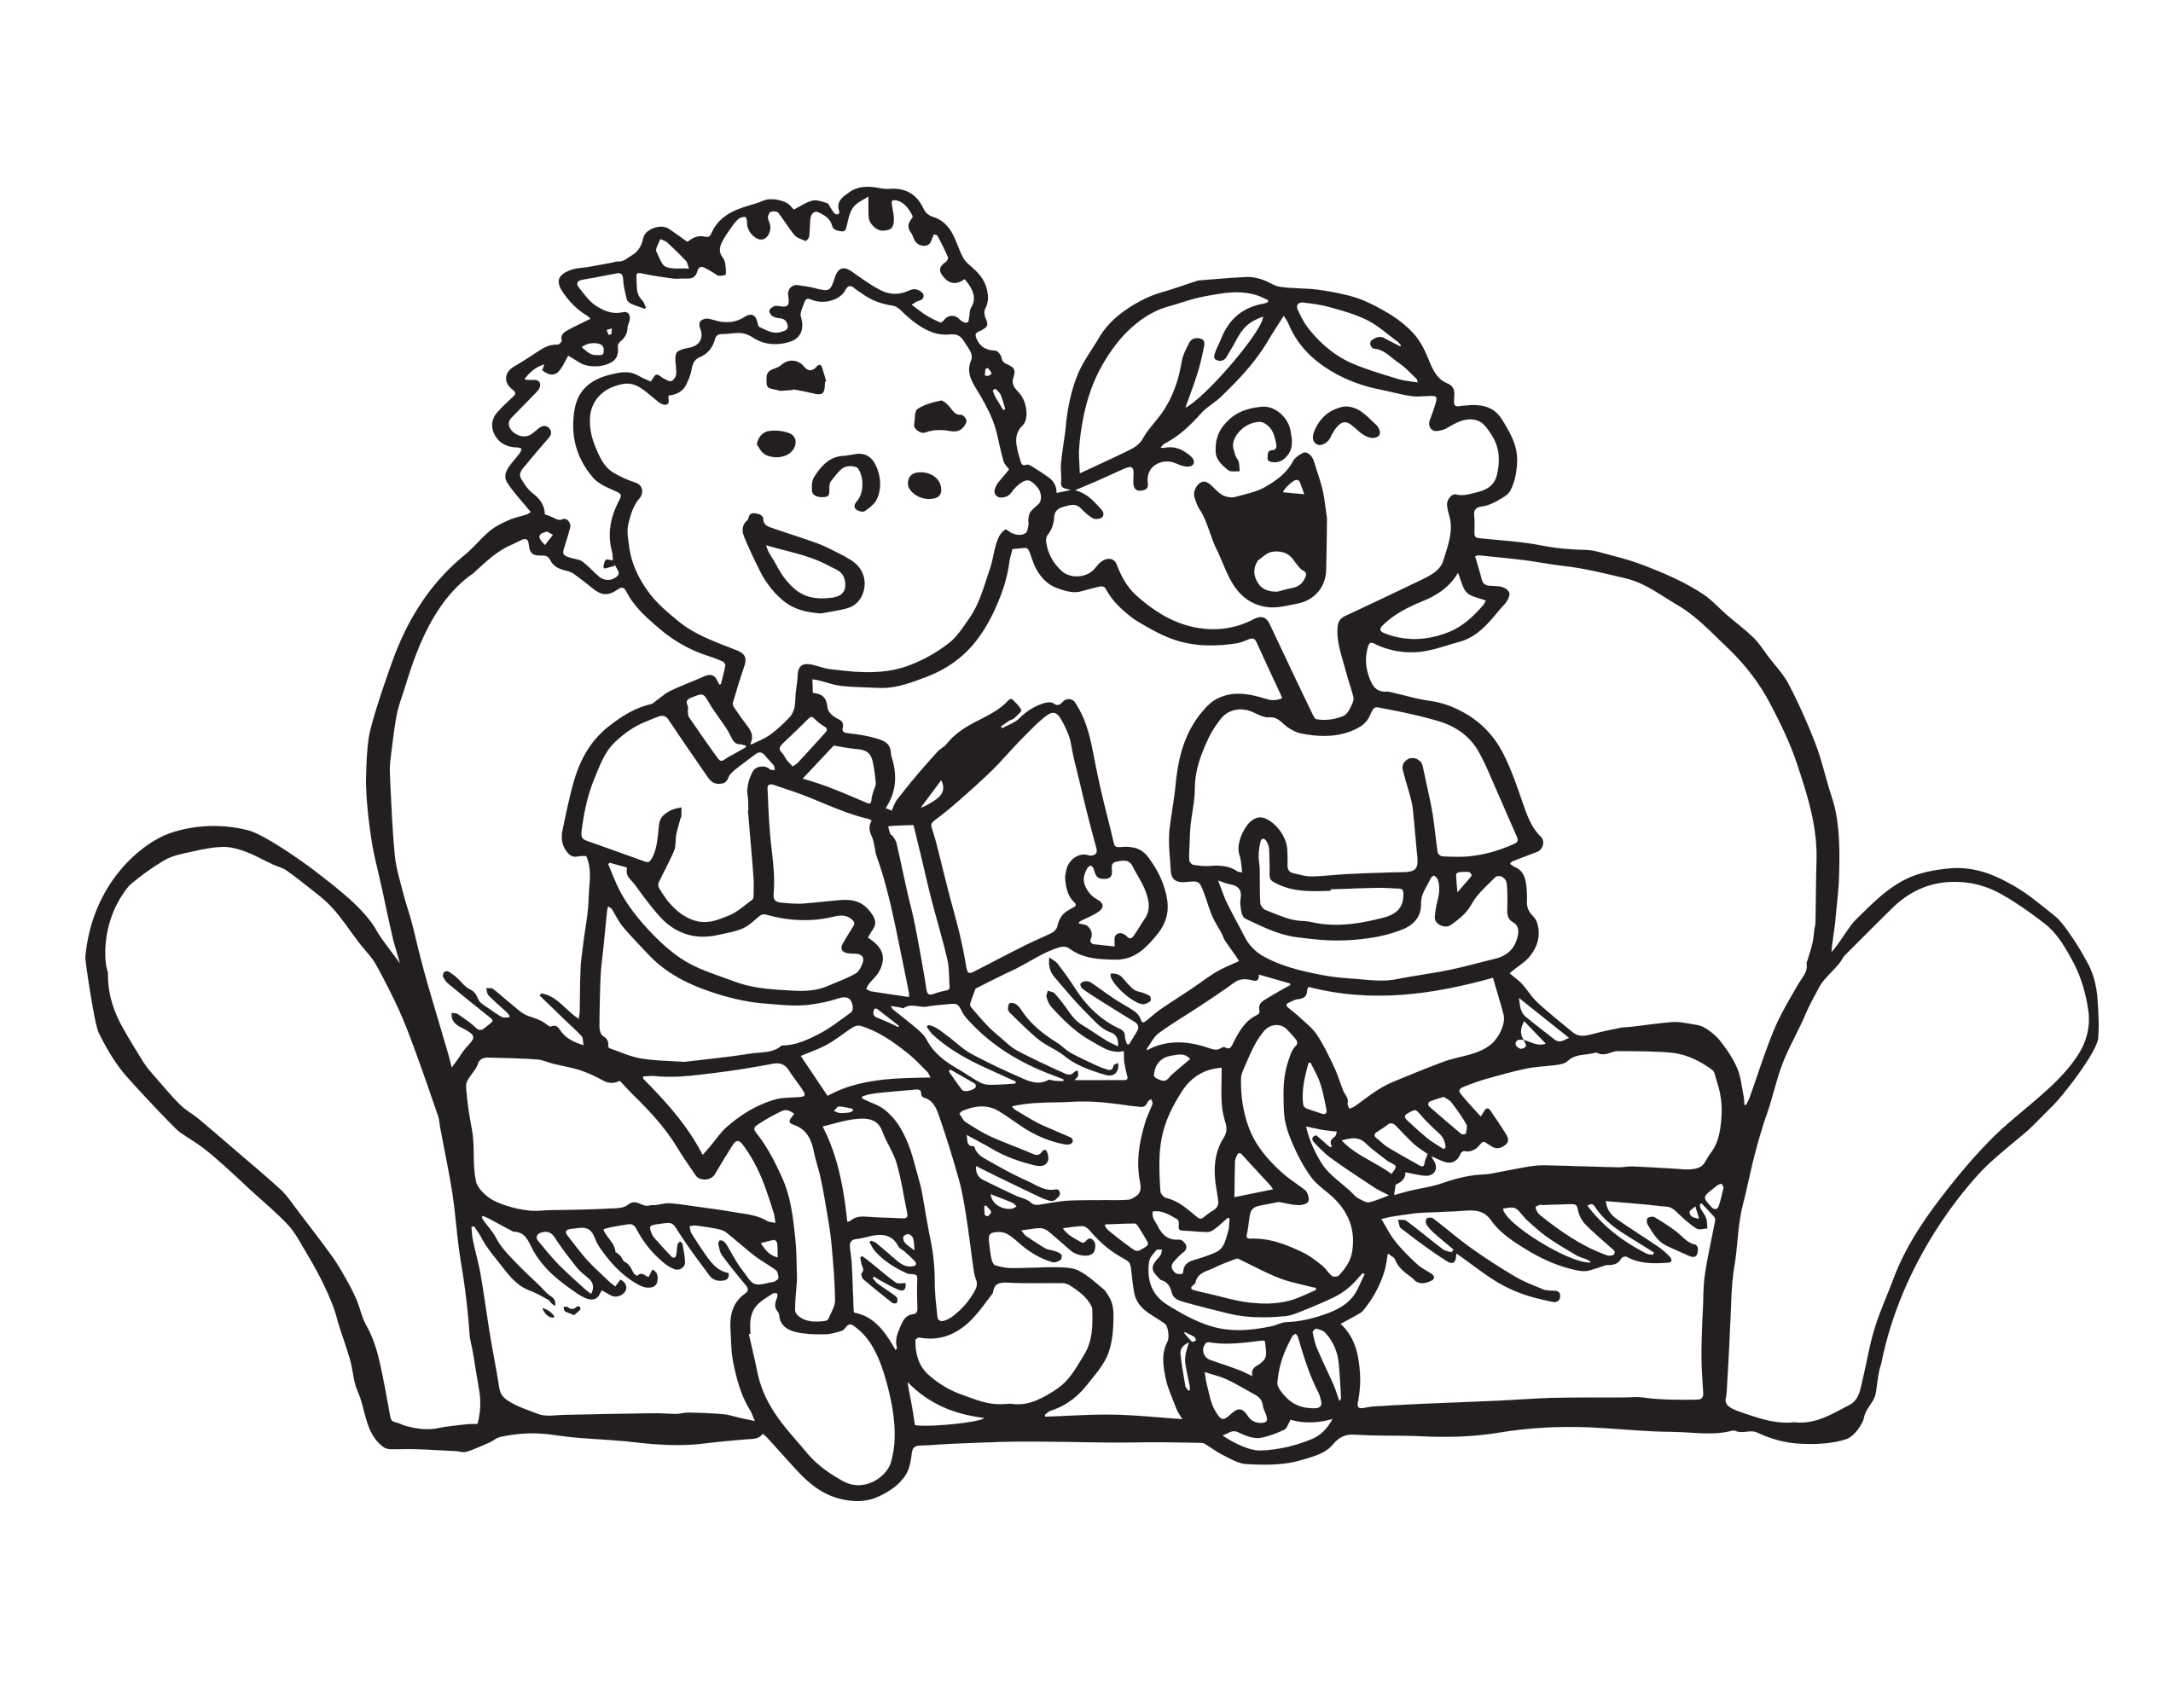 Coloring page of two friends on a sofa